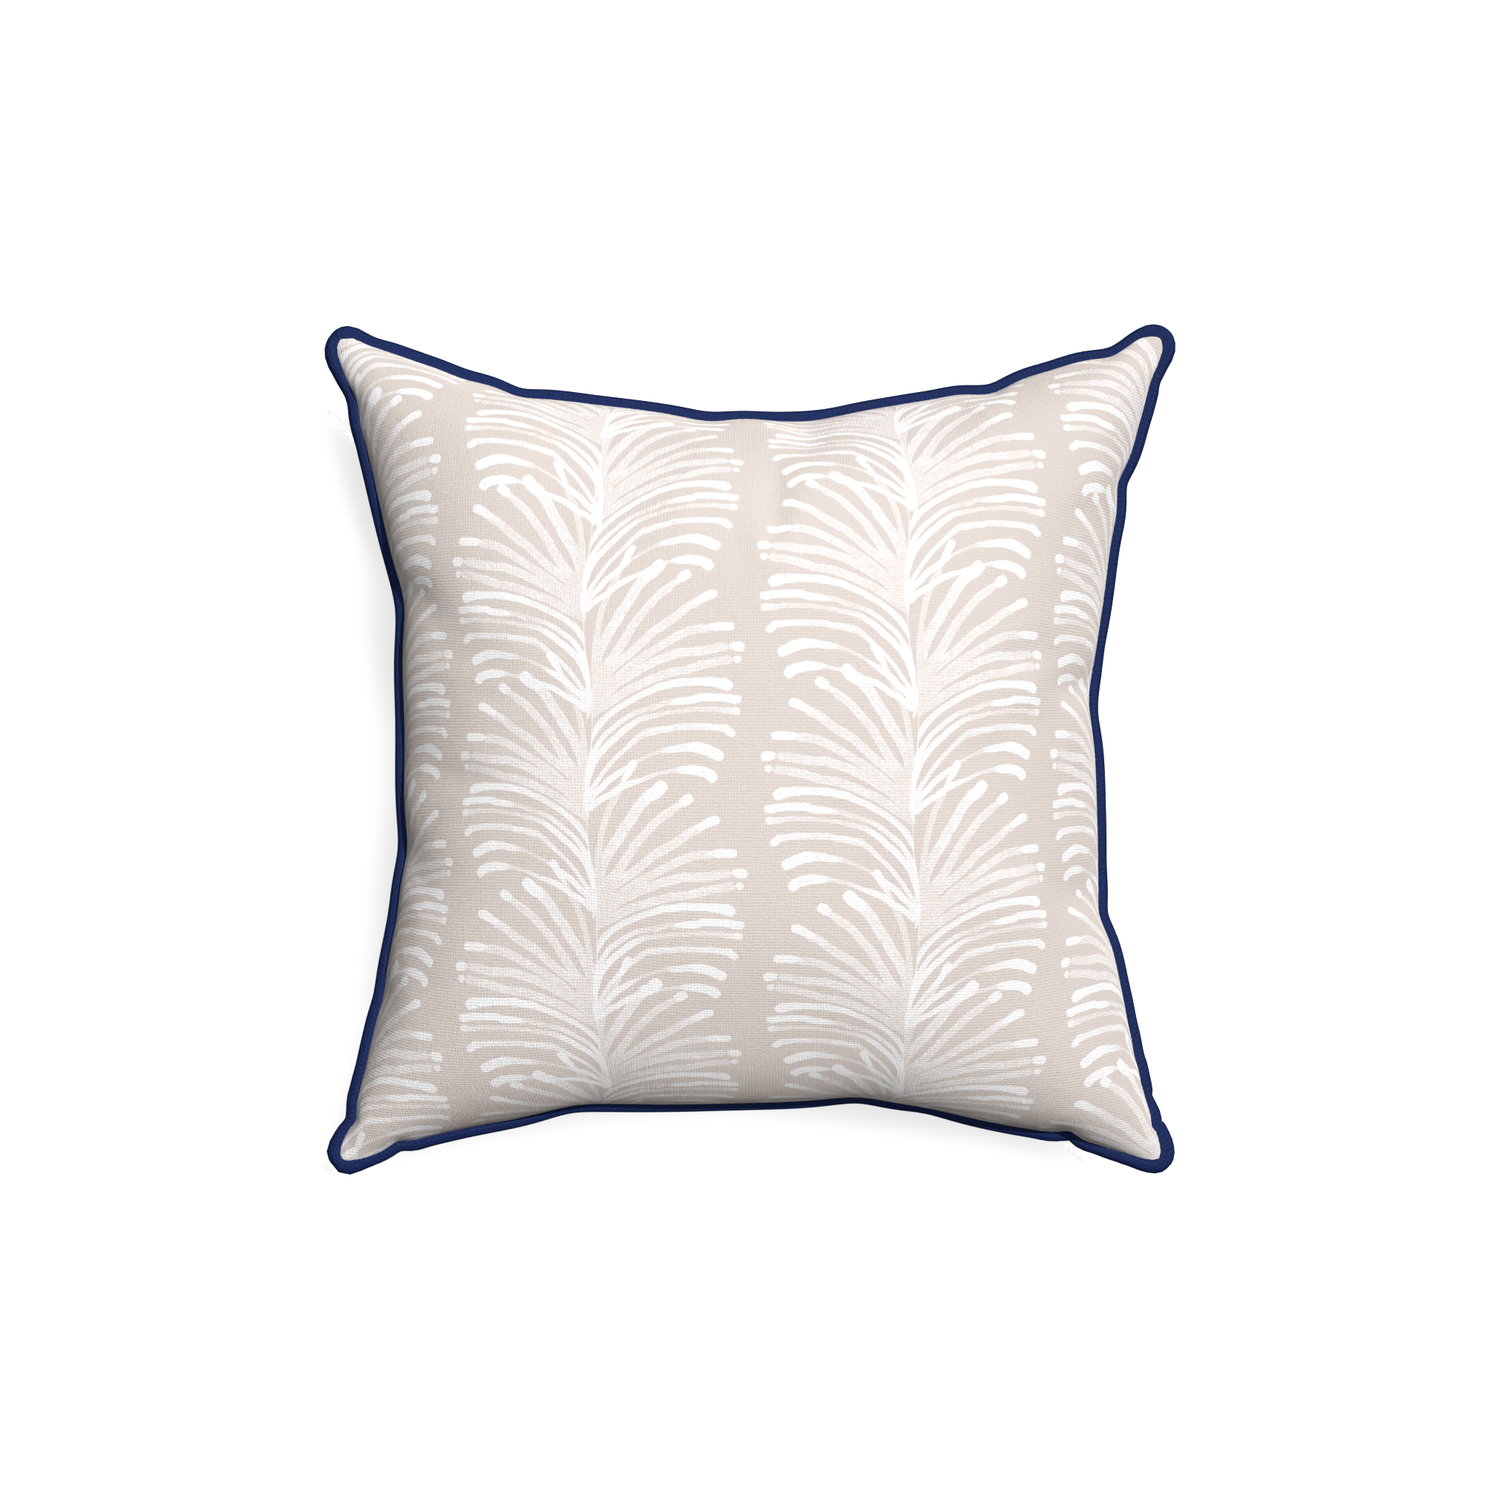 18-square emma sand custom pillow with midnight piping on white background